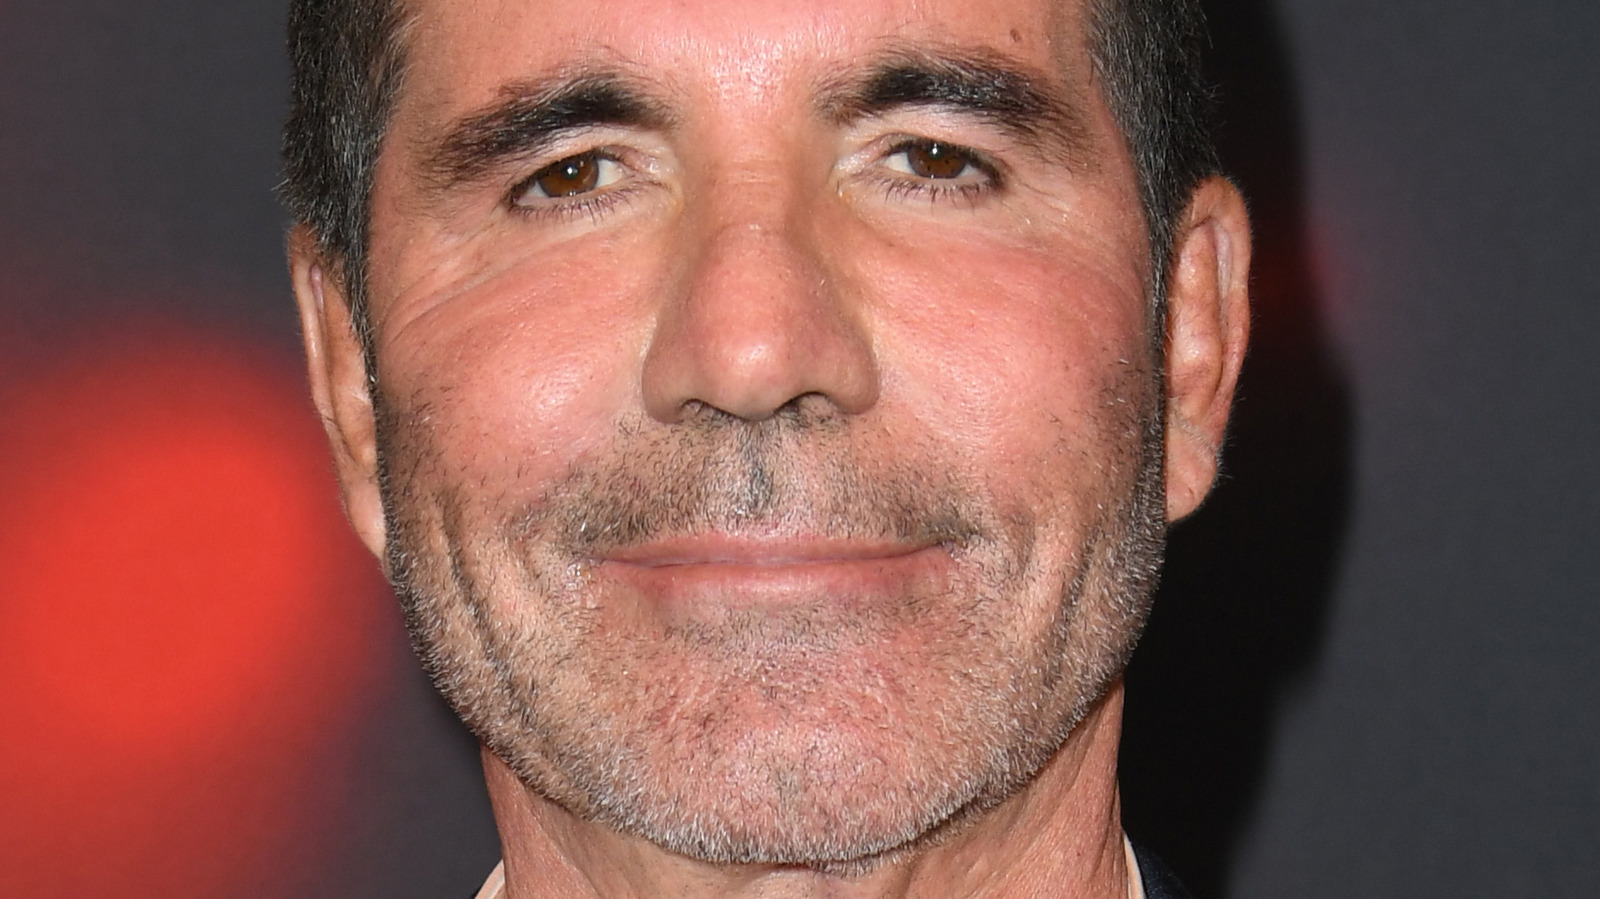 Simon Cowell Confirms What We All Suspected About His Plastic Surgery